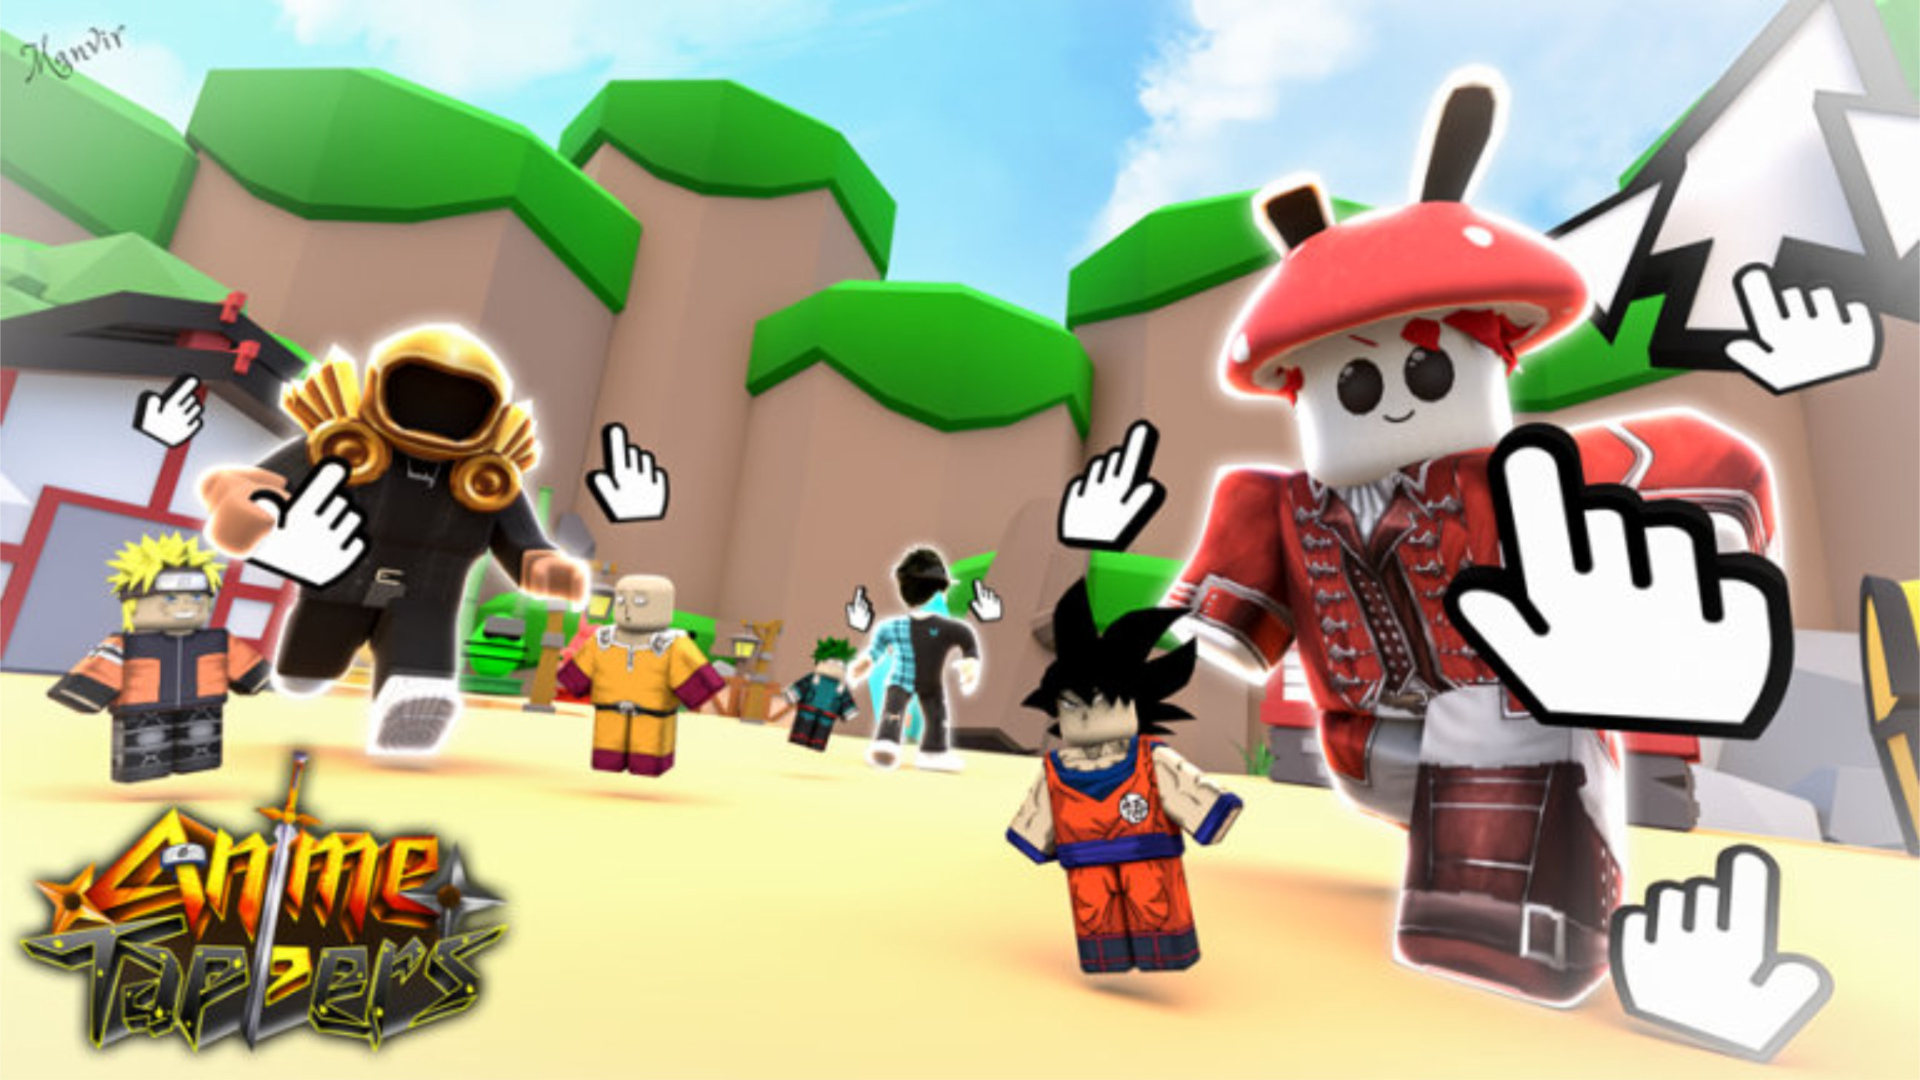 NEW CODES* [UPDATE 45 + x7!] Anime Fighters Simulator ROBLOX